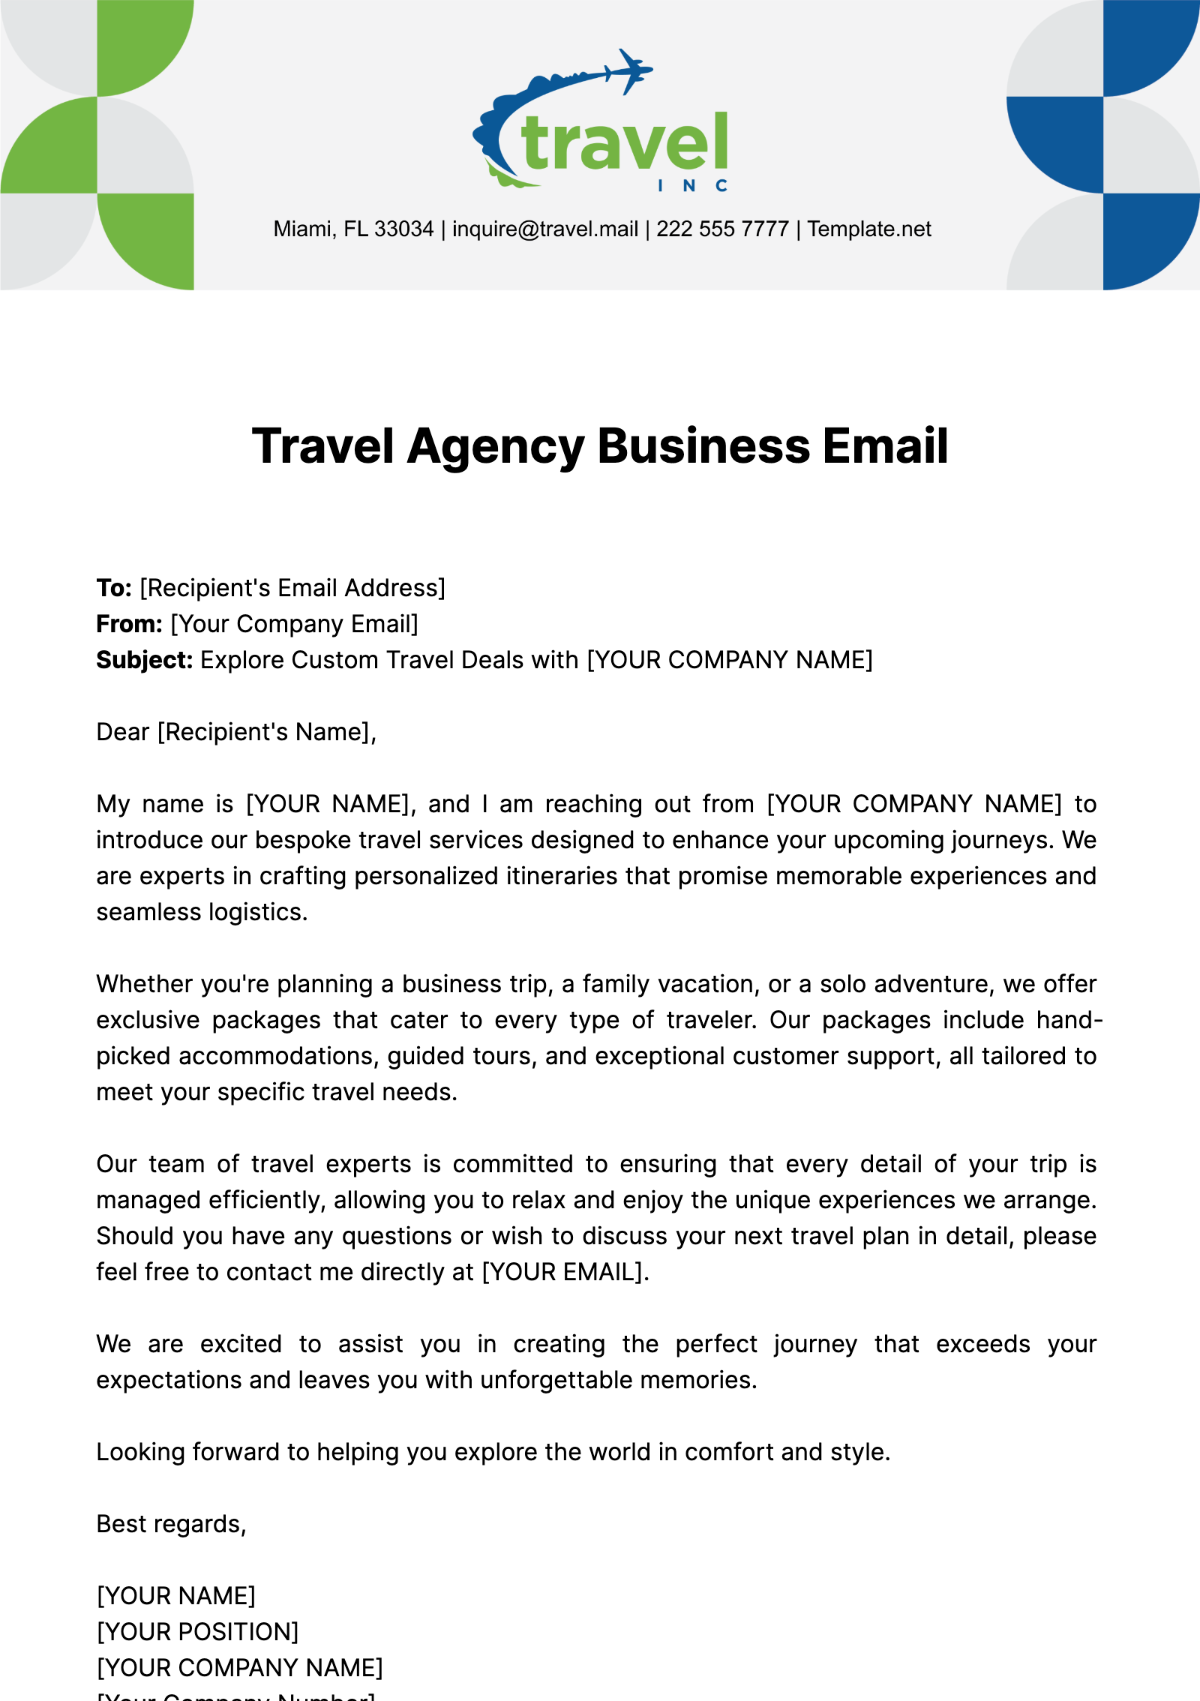 Free Travel Agency Business Email Template